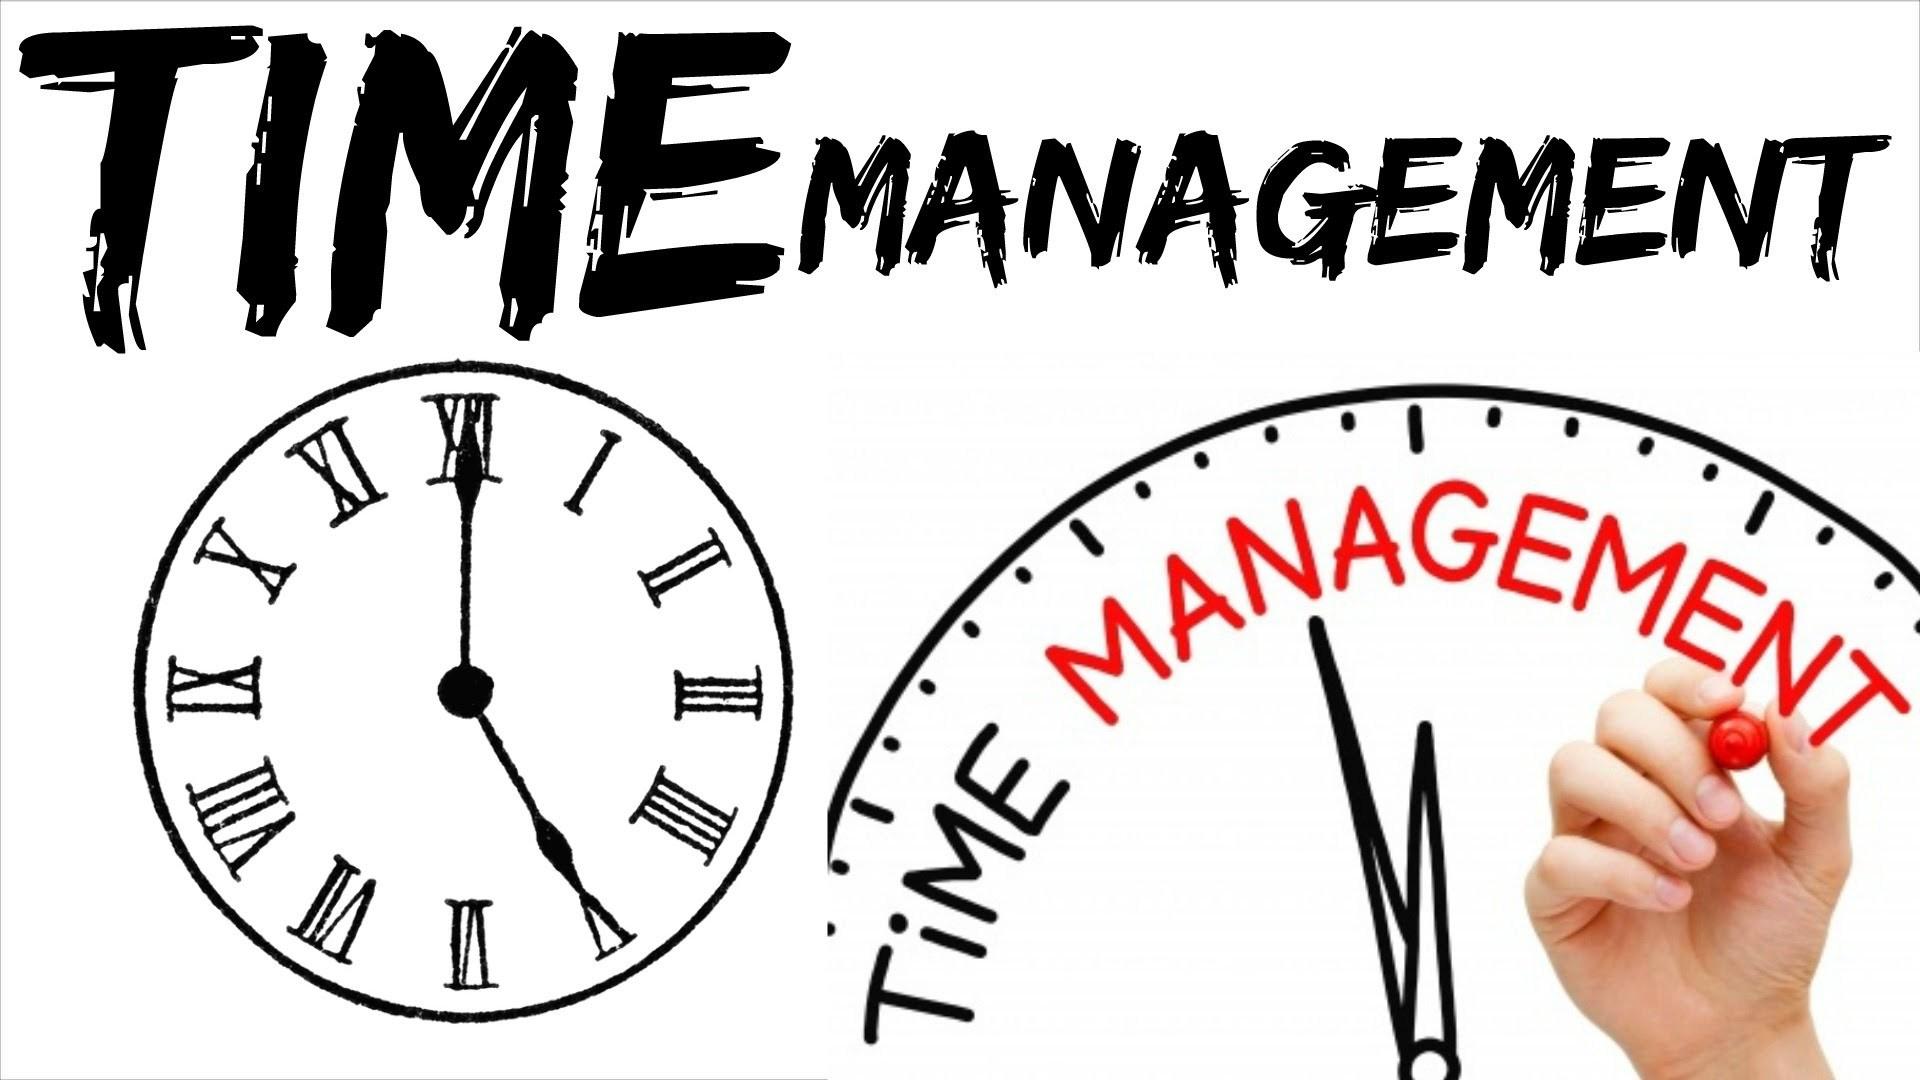 Ten time management myths: Part 1. in Time. Time